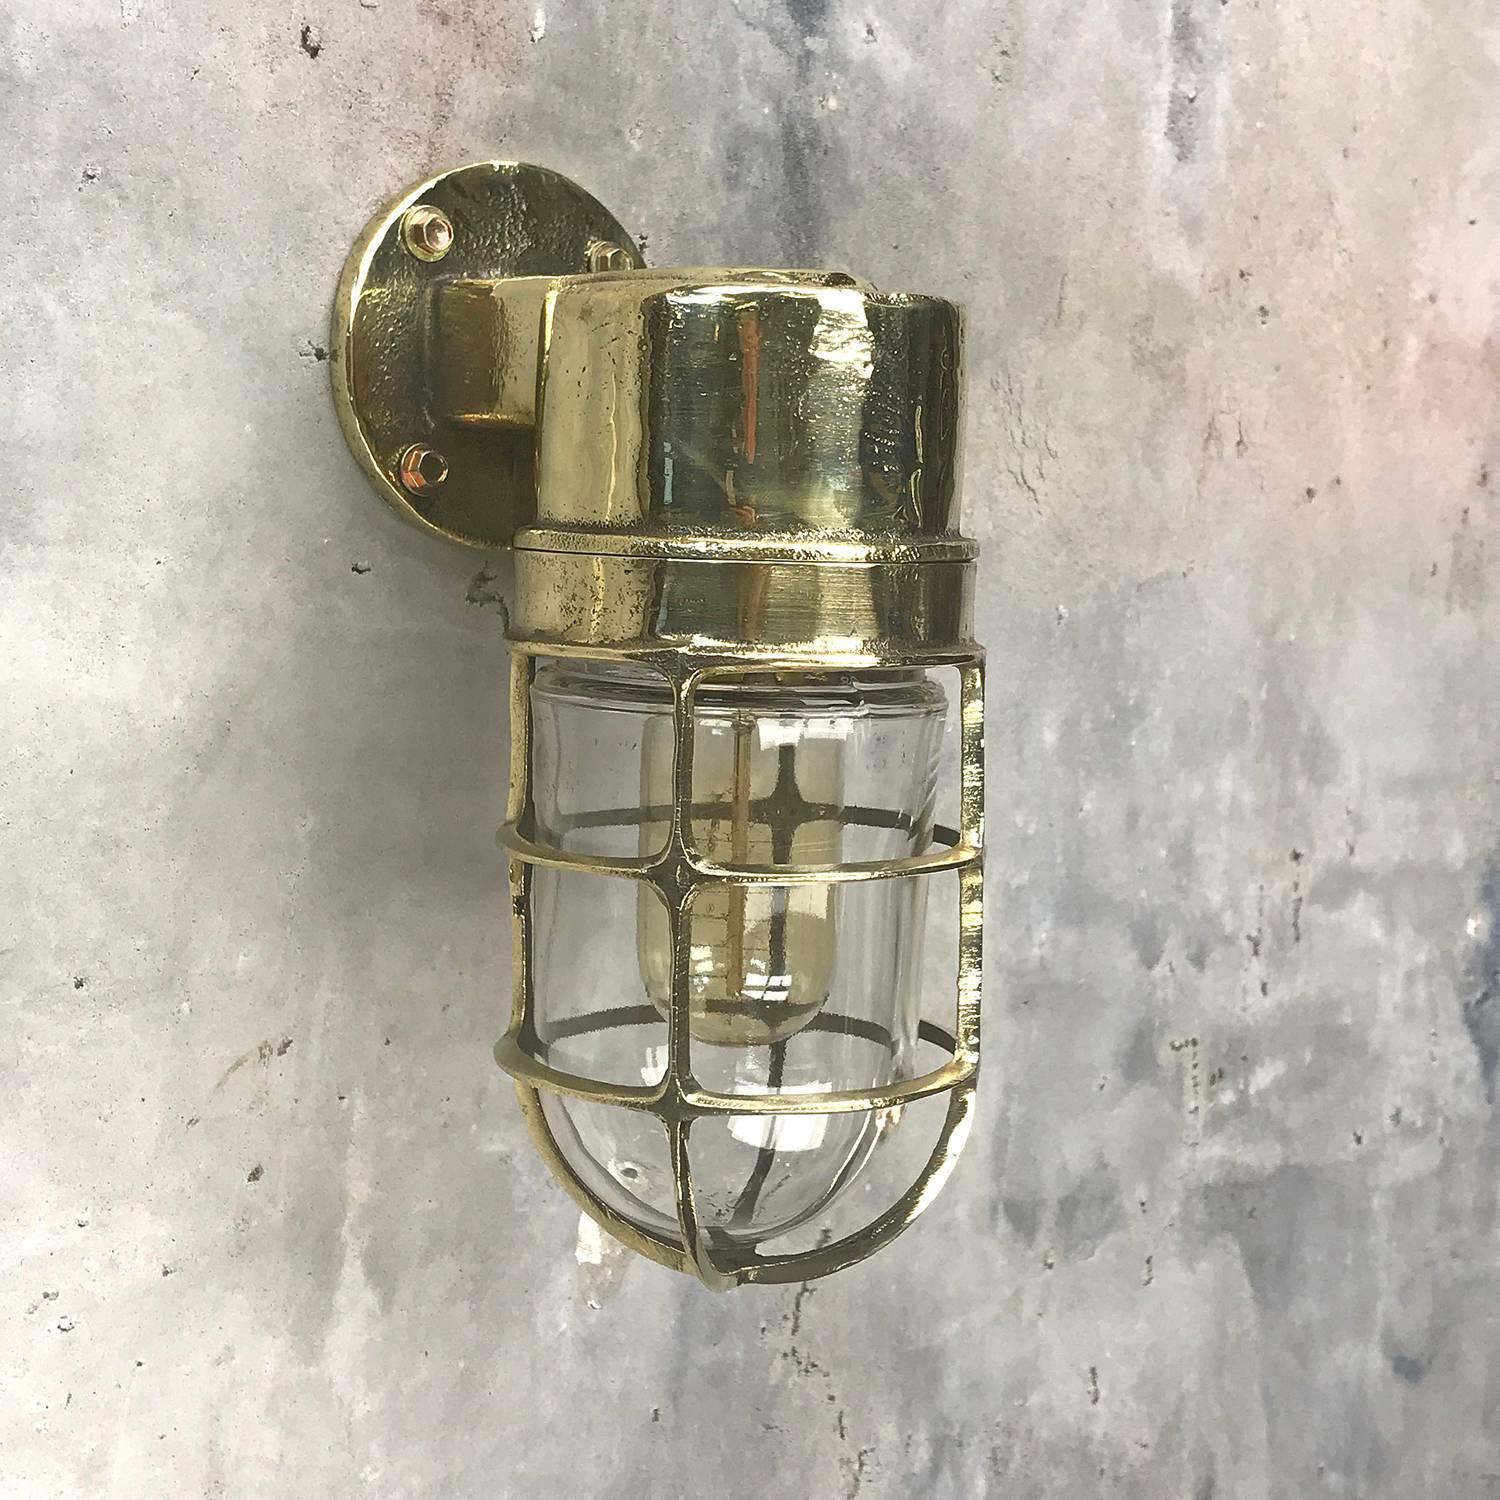 Made in Germany these lights were salvaged from cargo ships and supertankers made during the 1970's, they are a substantial brass casting with a tempered glass dome and cast brass protective cage.

Restored, re-wired and factory tested by